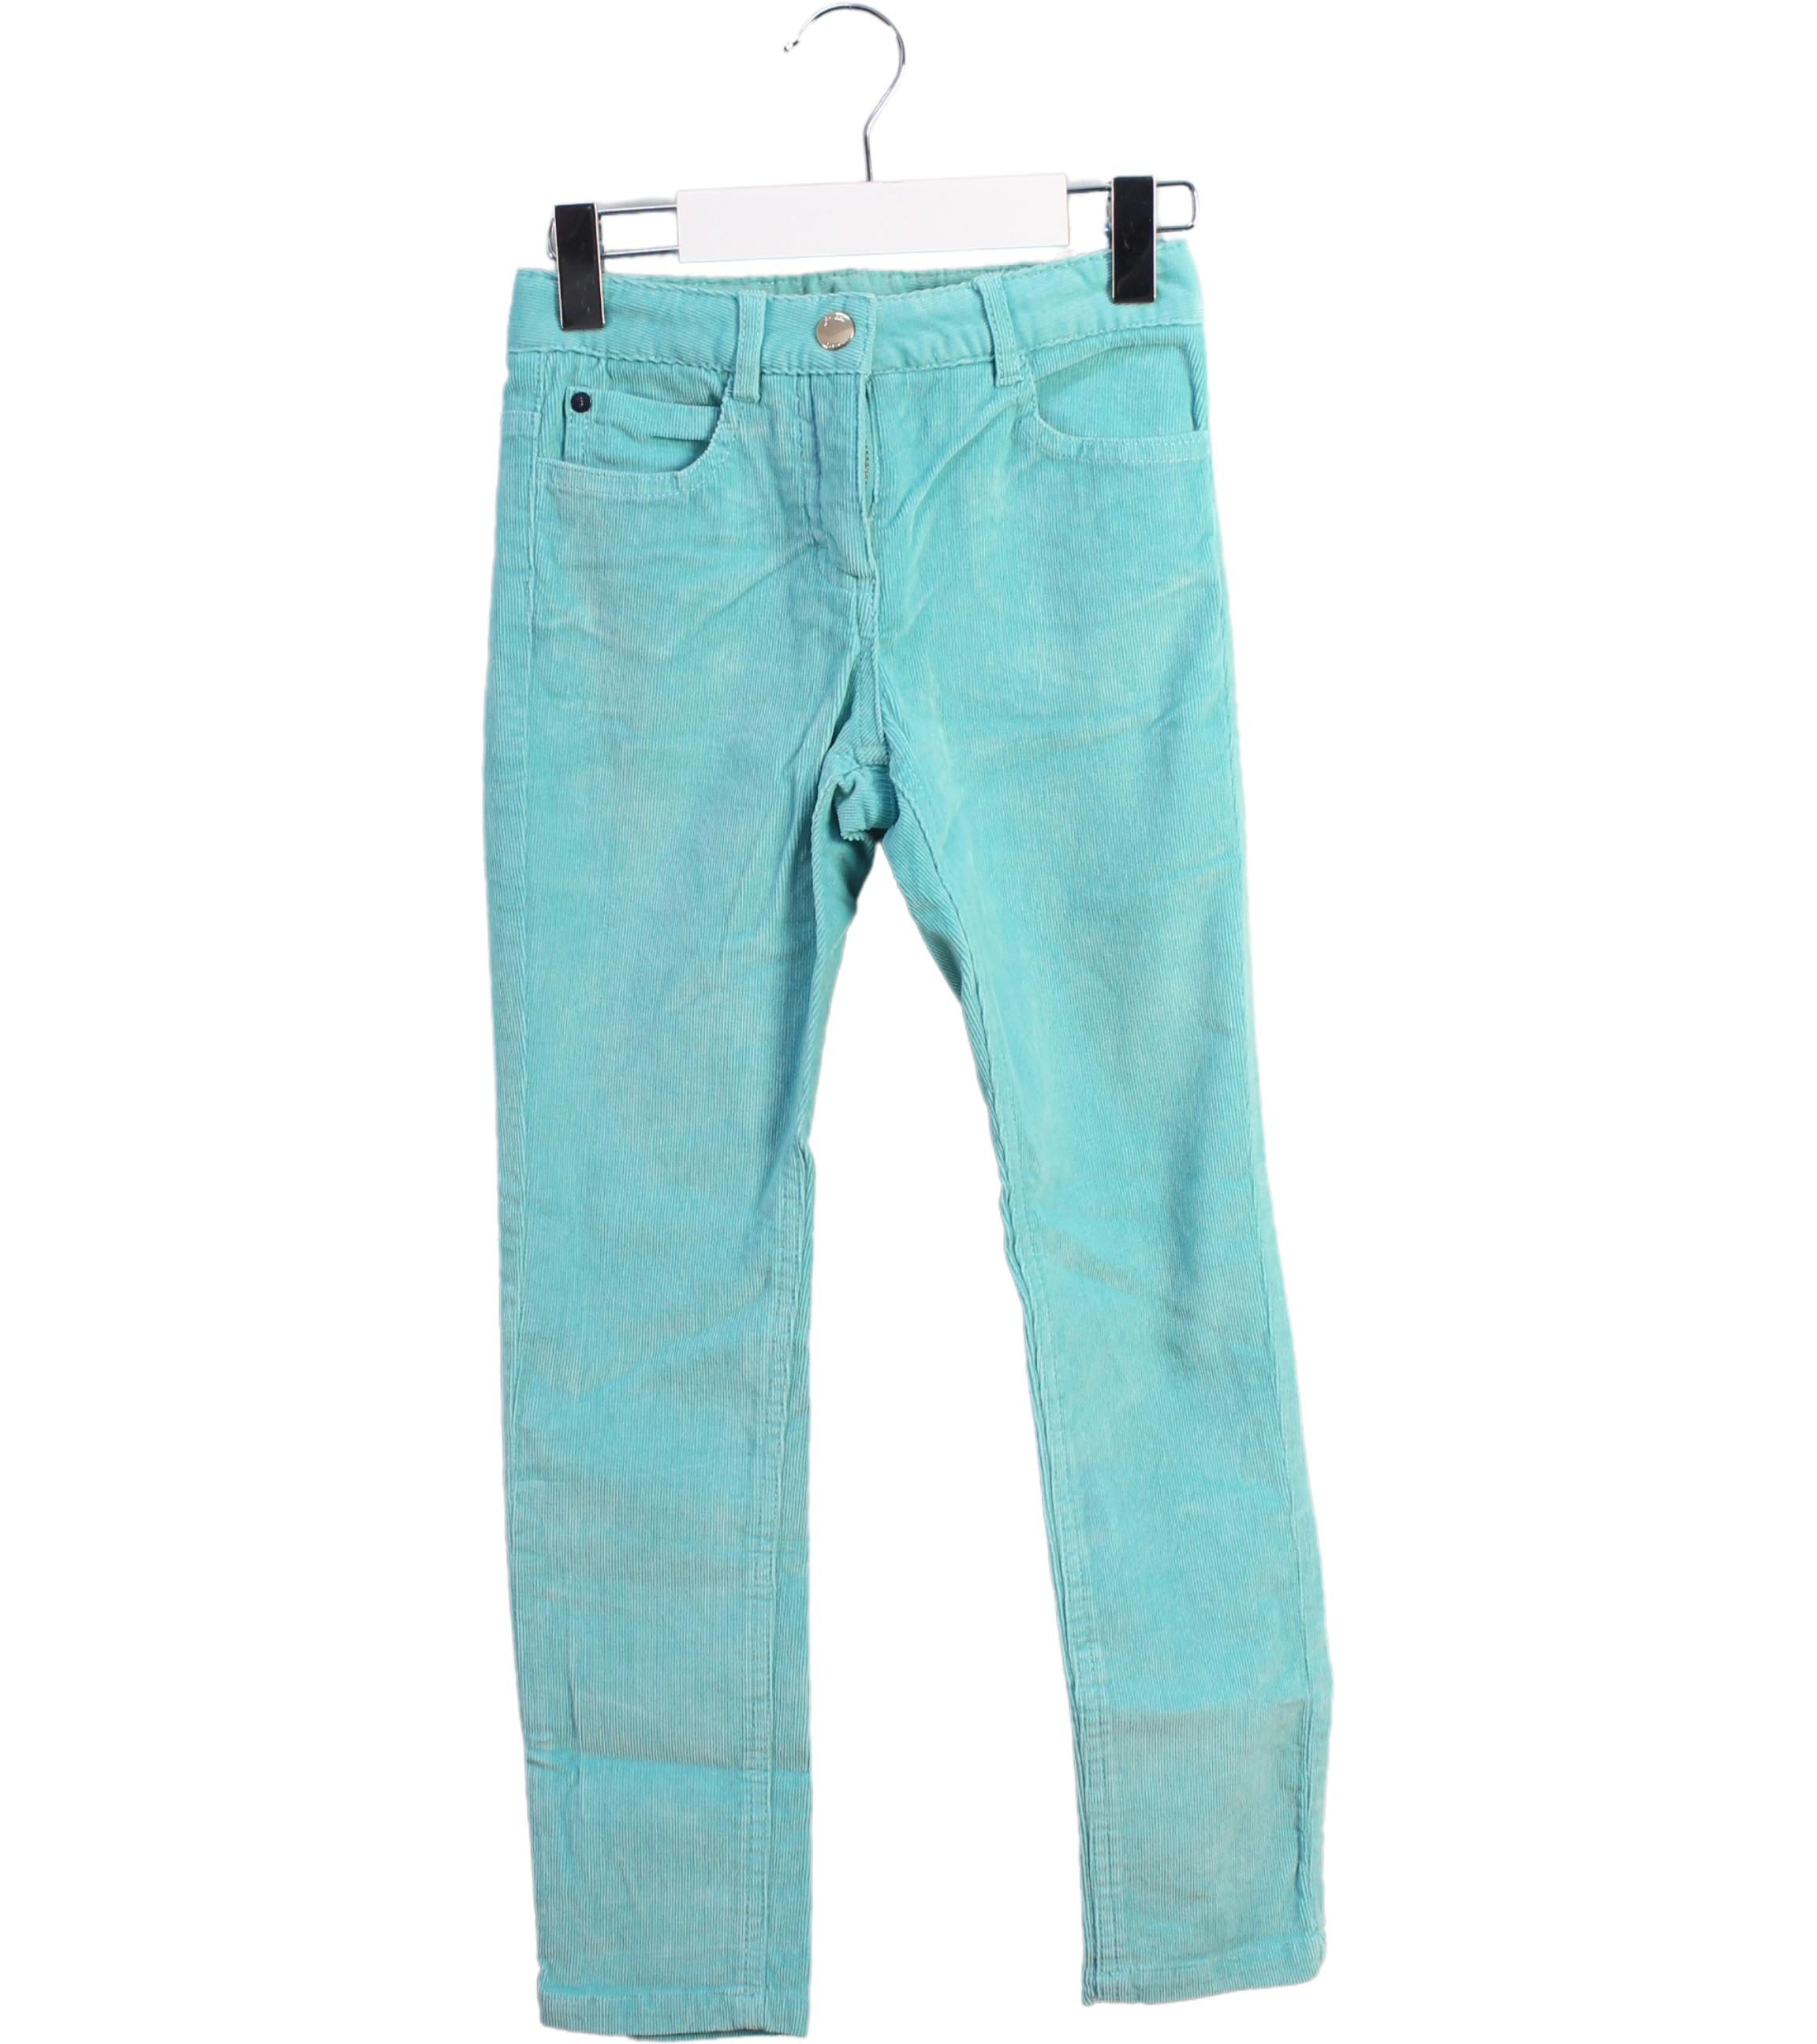 Belly Bandit Casual Pants